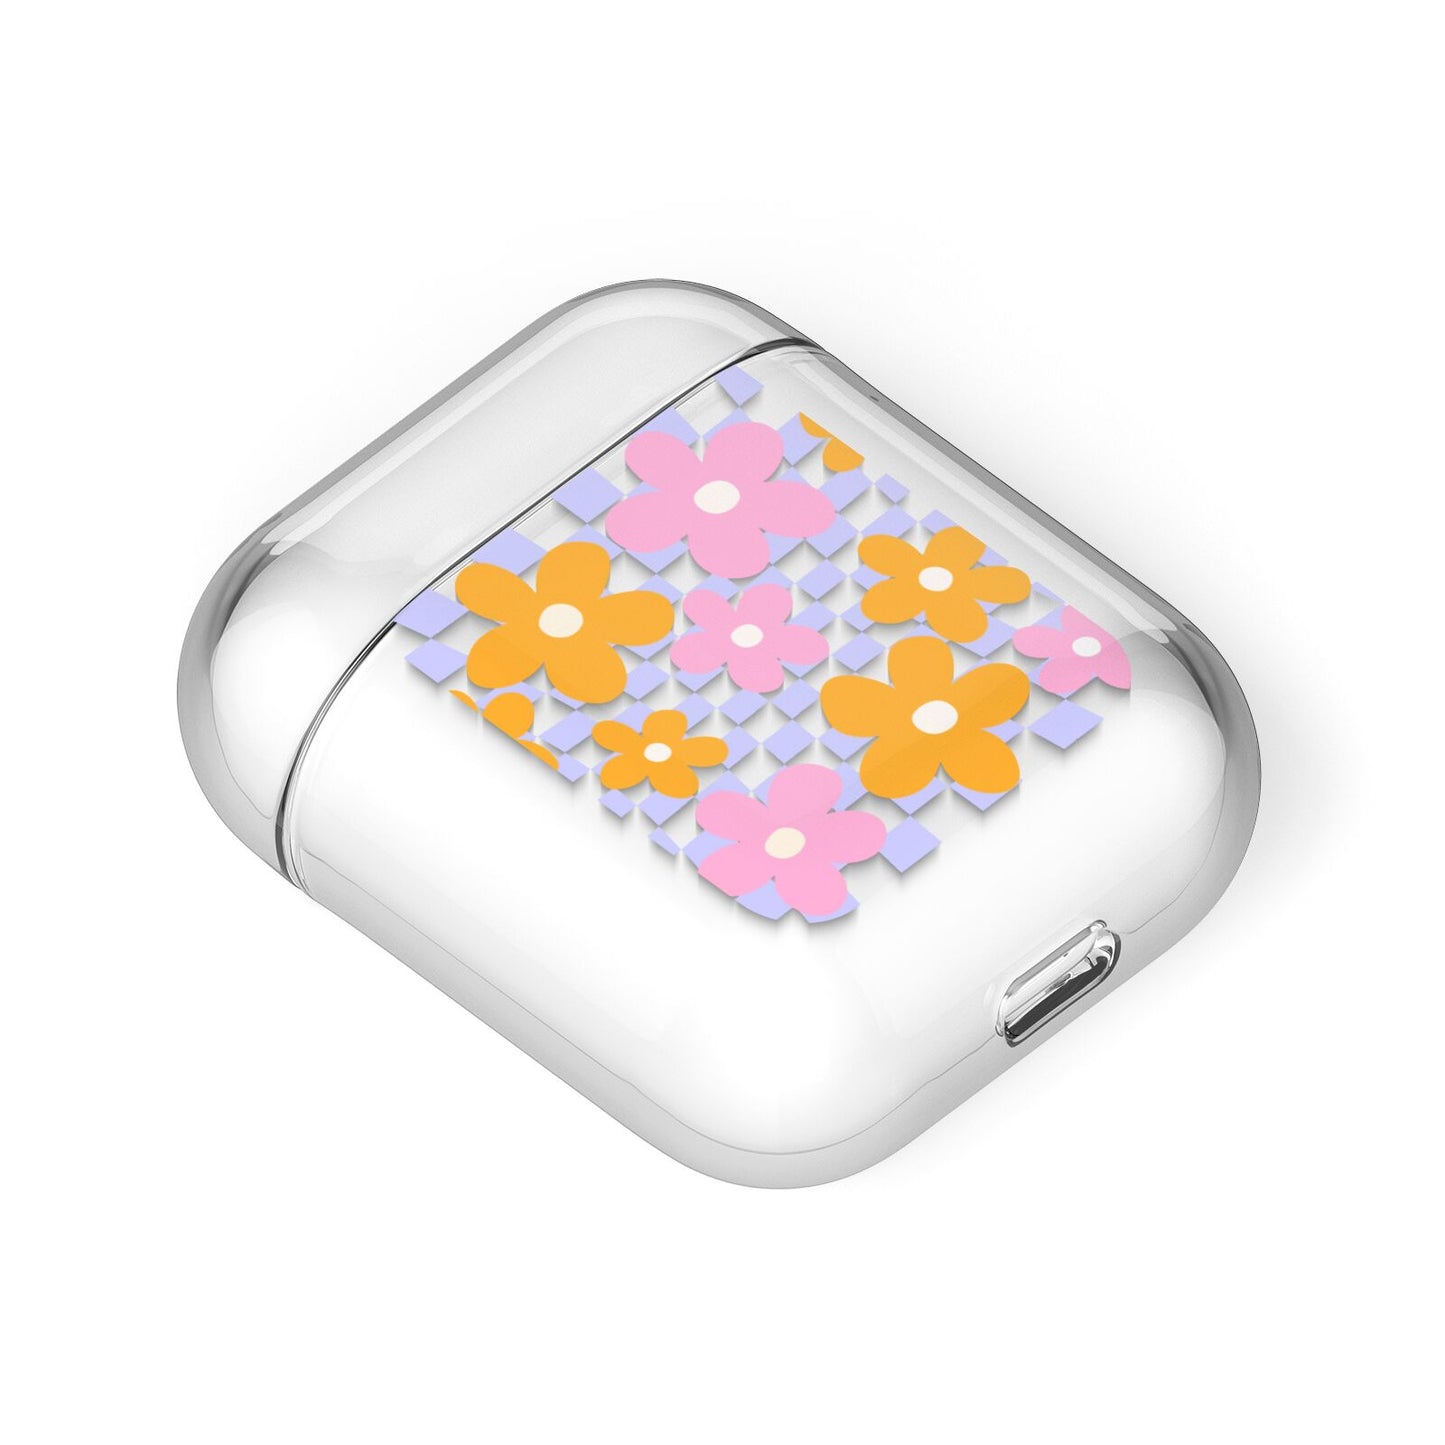 Retro Check Floral AirPods Case Laid Flat